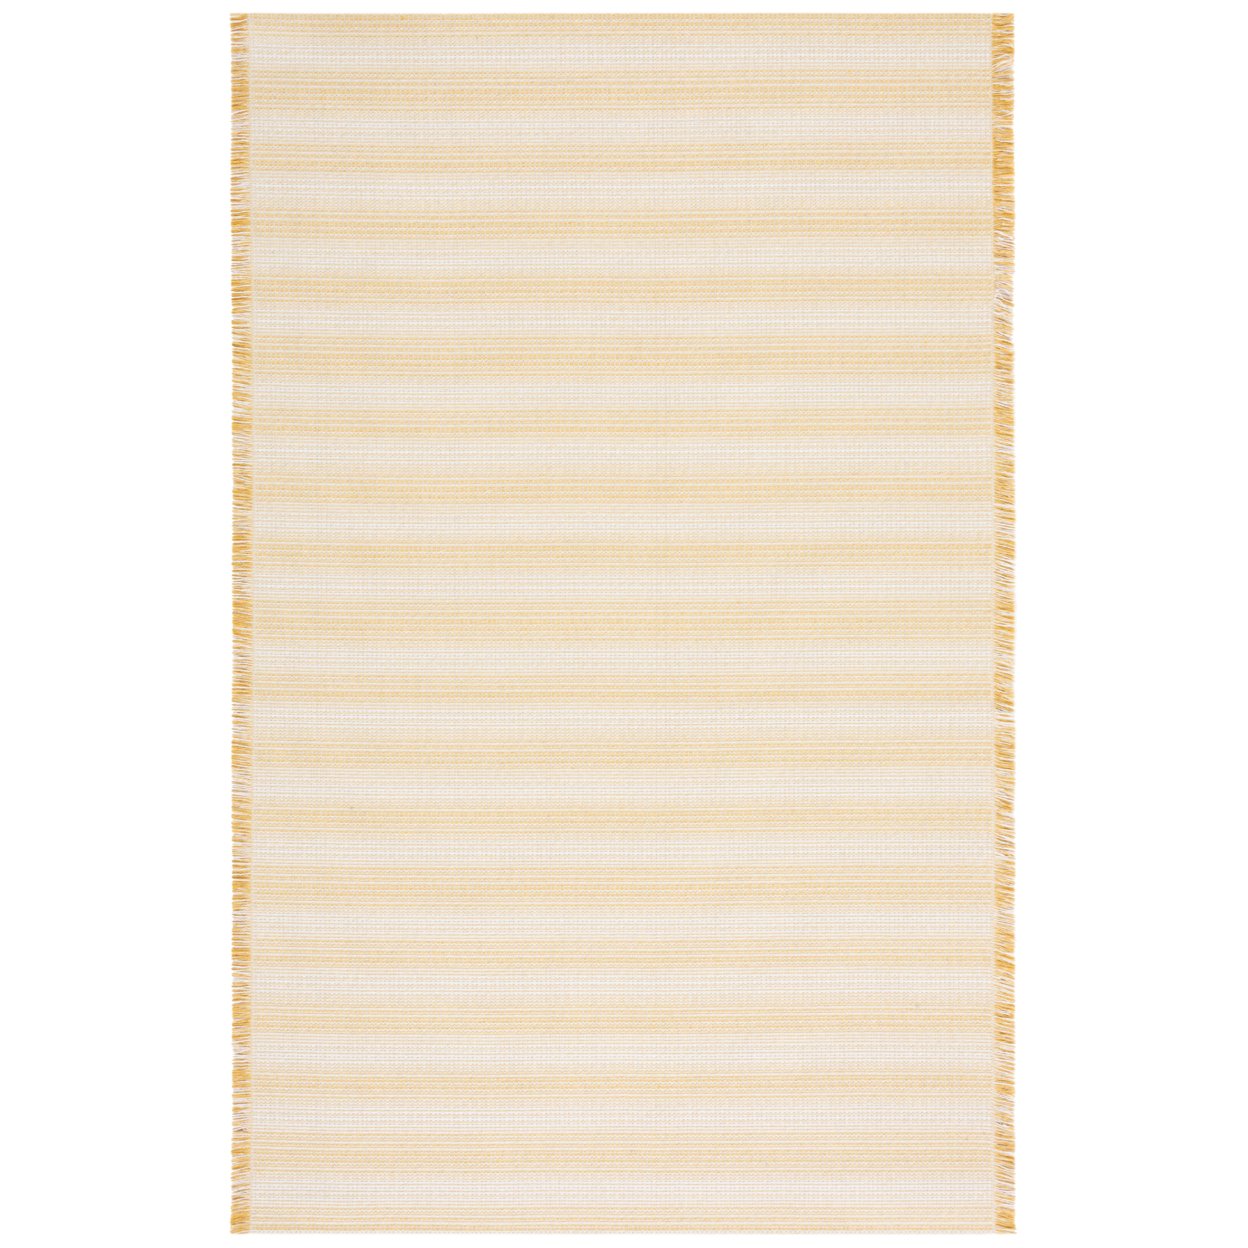 Safavieh AGT501C Augustine 500 Ivory / Yellow - Charcoal / Ivory, 6'-4 X 9'-6